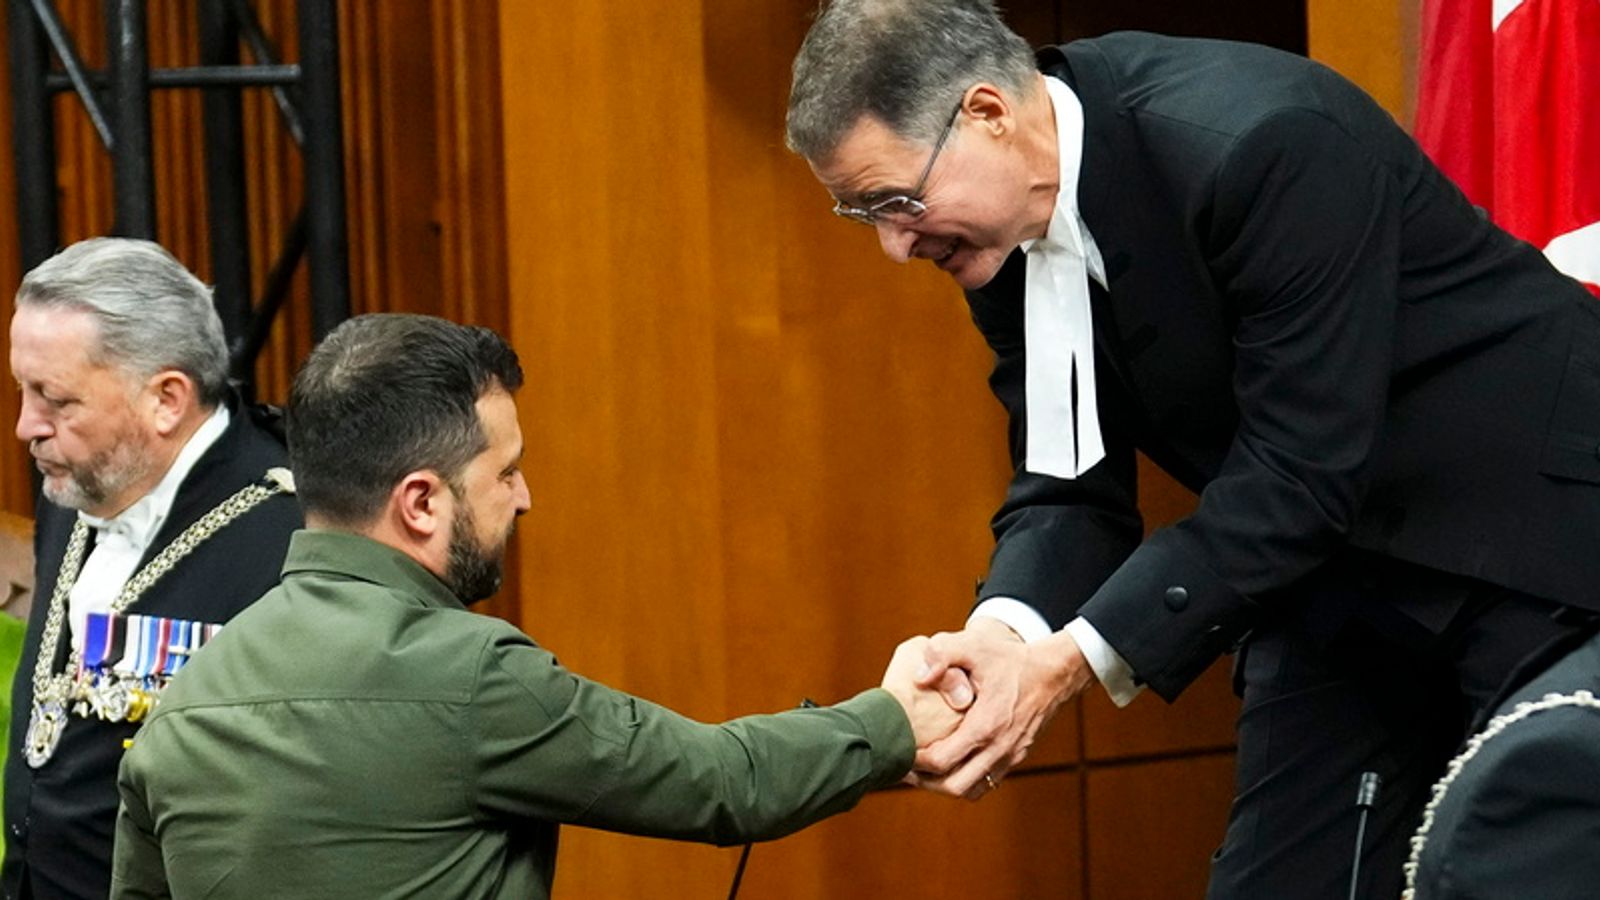 Anthony Rota: Canadian Speaker resigns after inviting man who fought for Nazis to Volodymyr Zelenskyy speech